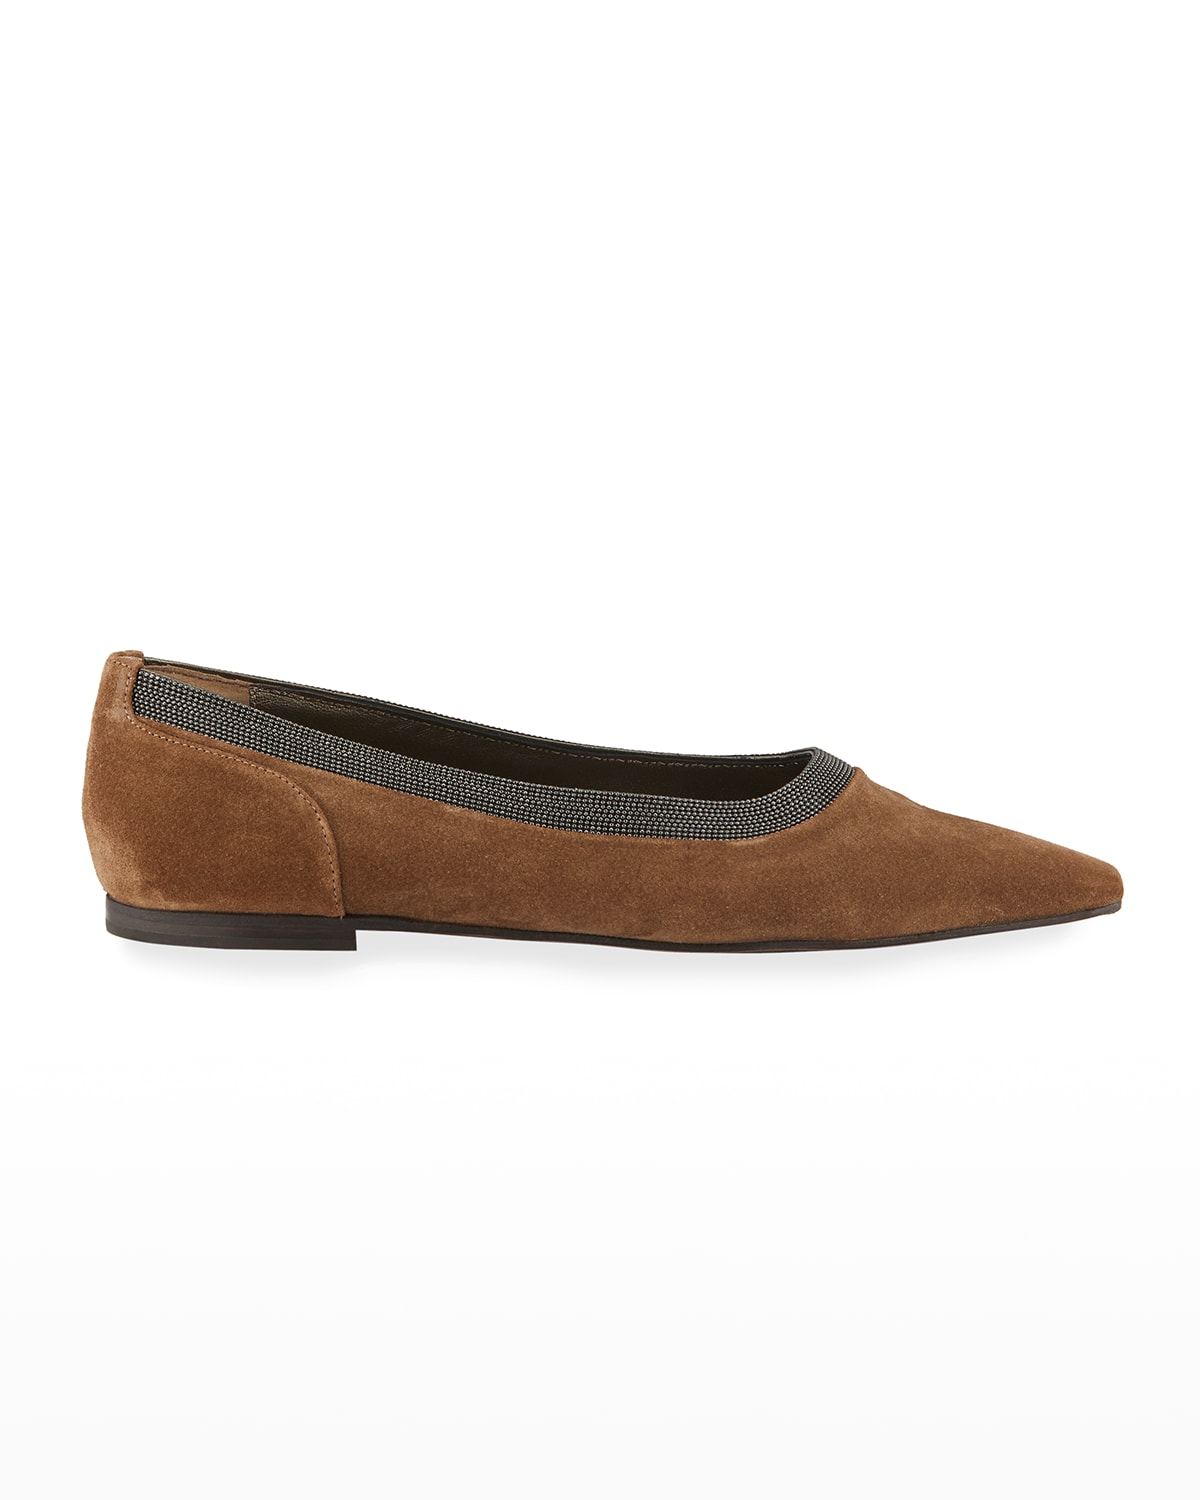 THE ROW Garcon Suede Loafers | Neiman Marcus